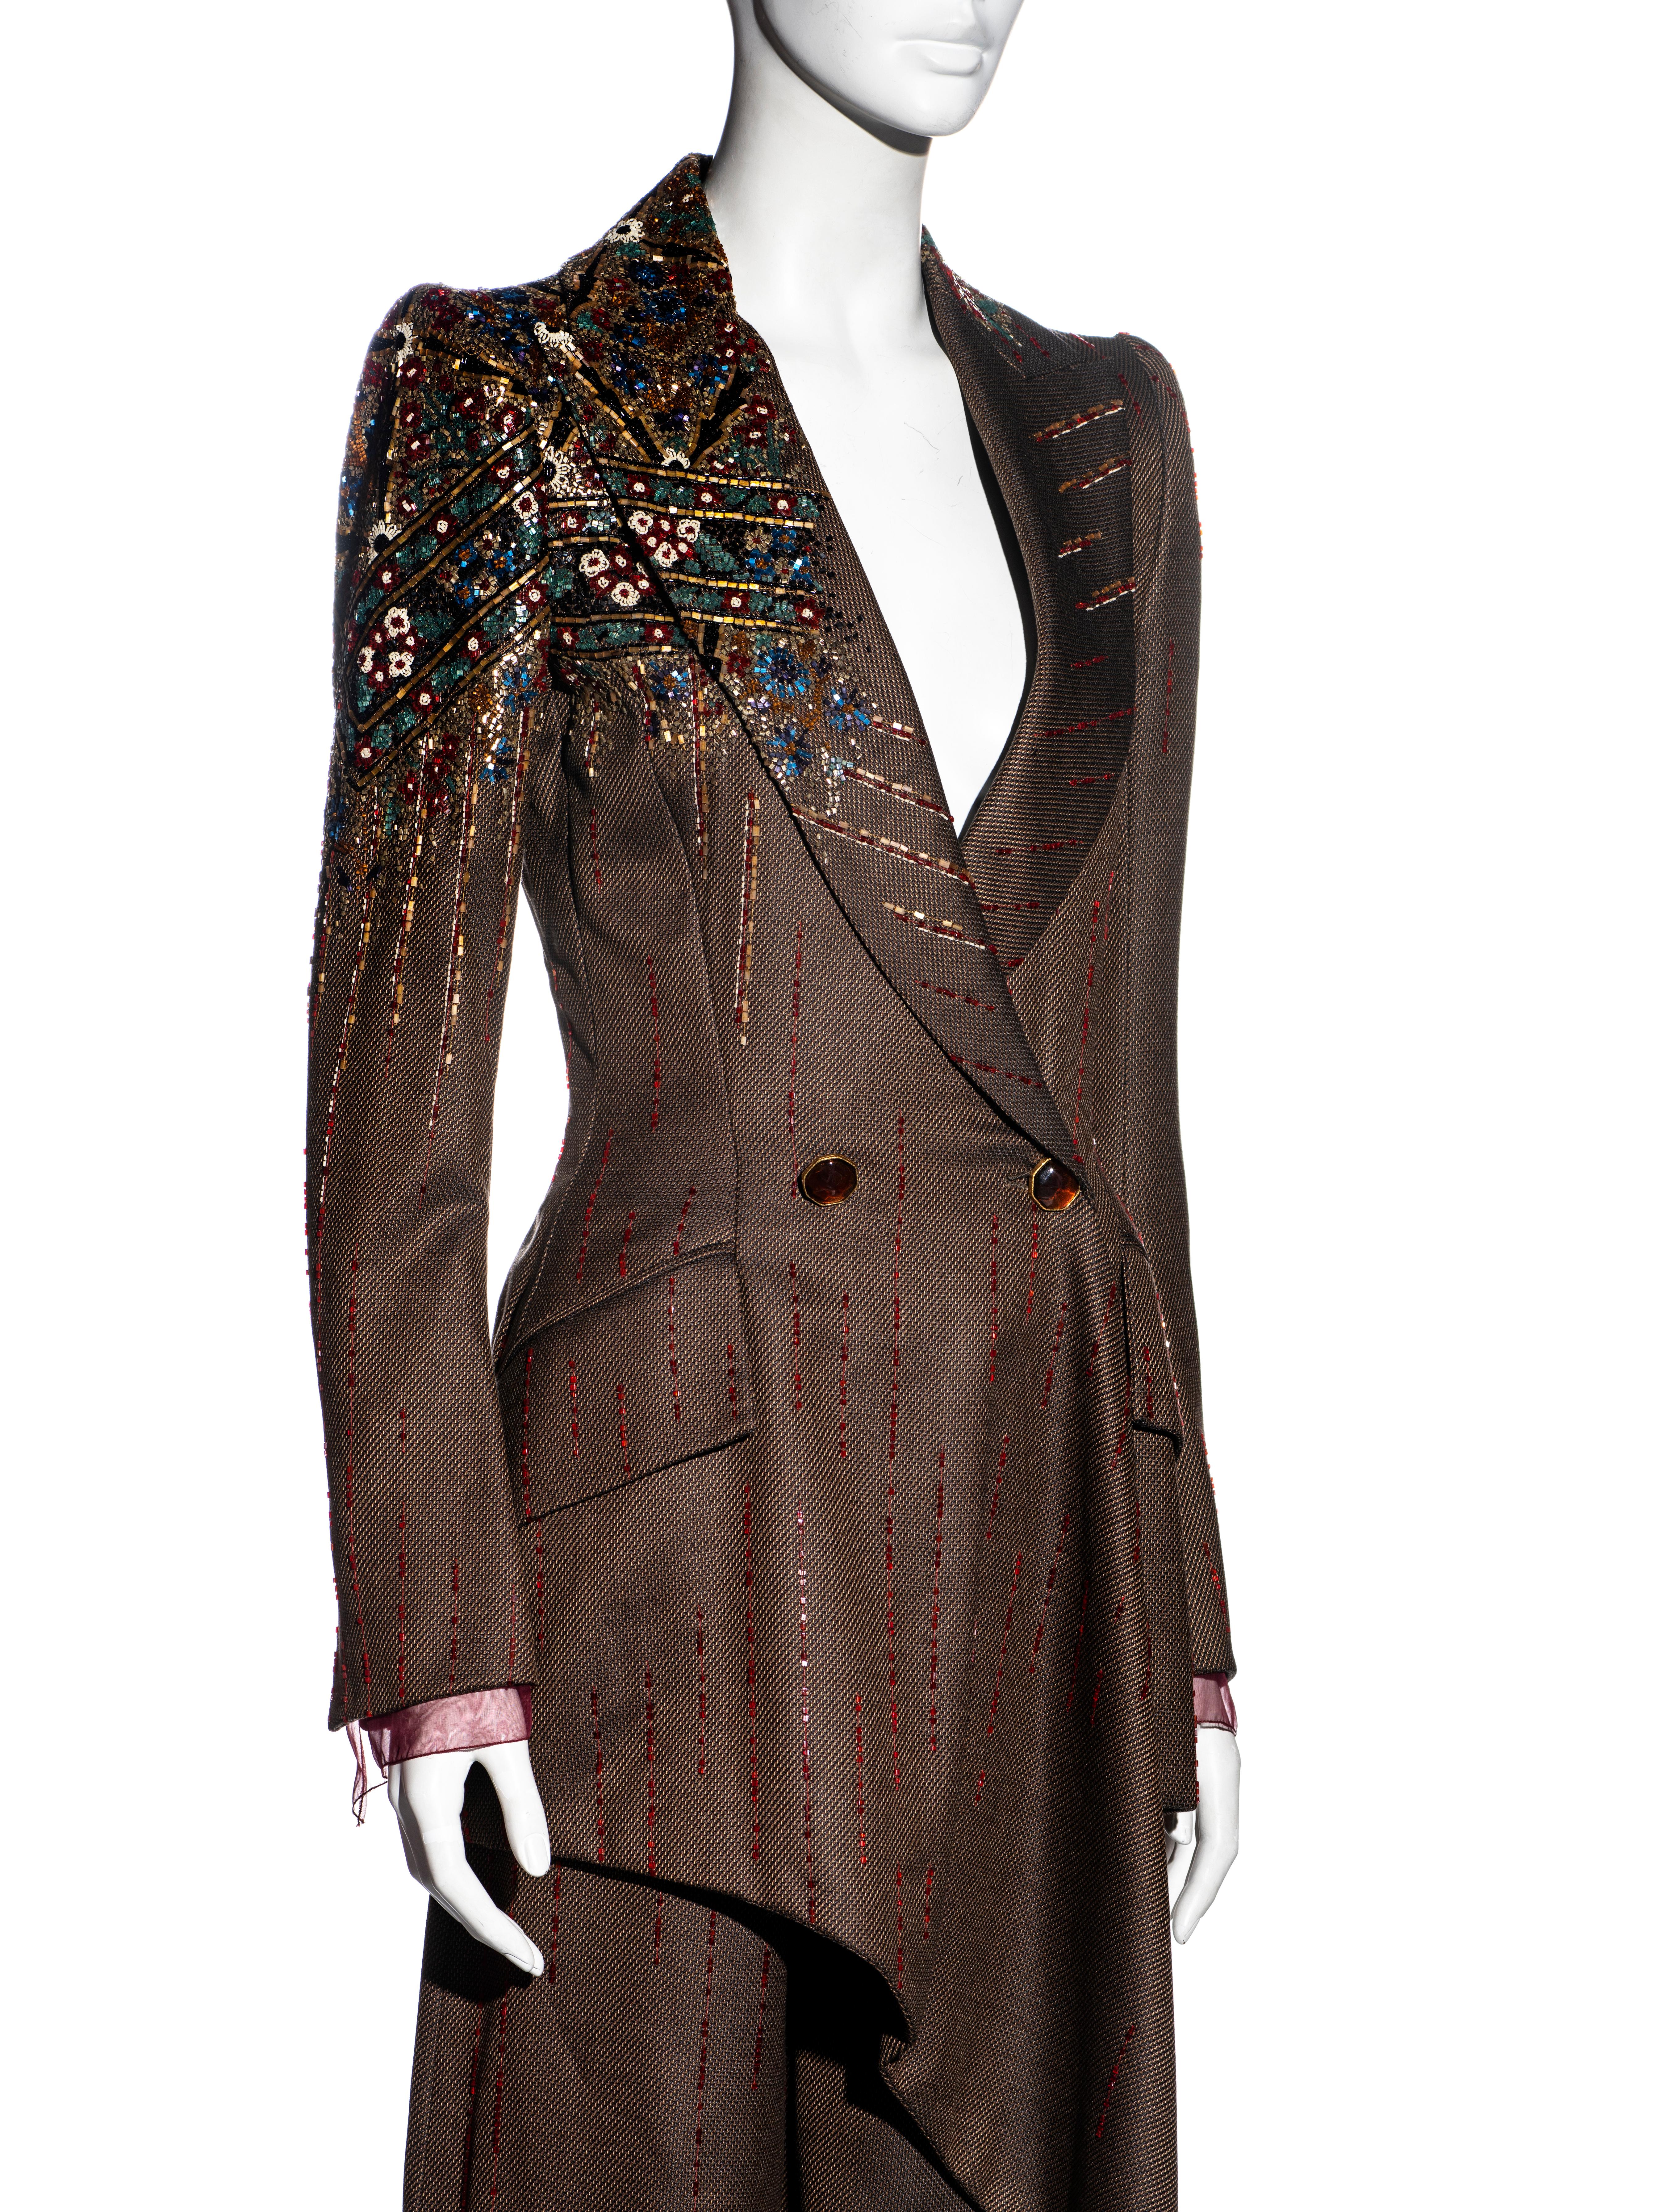 Jean-Louis Scherrer Haute Couture embellished brown wool pant suit, fw 2001 For Sale 1